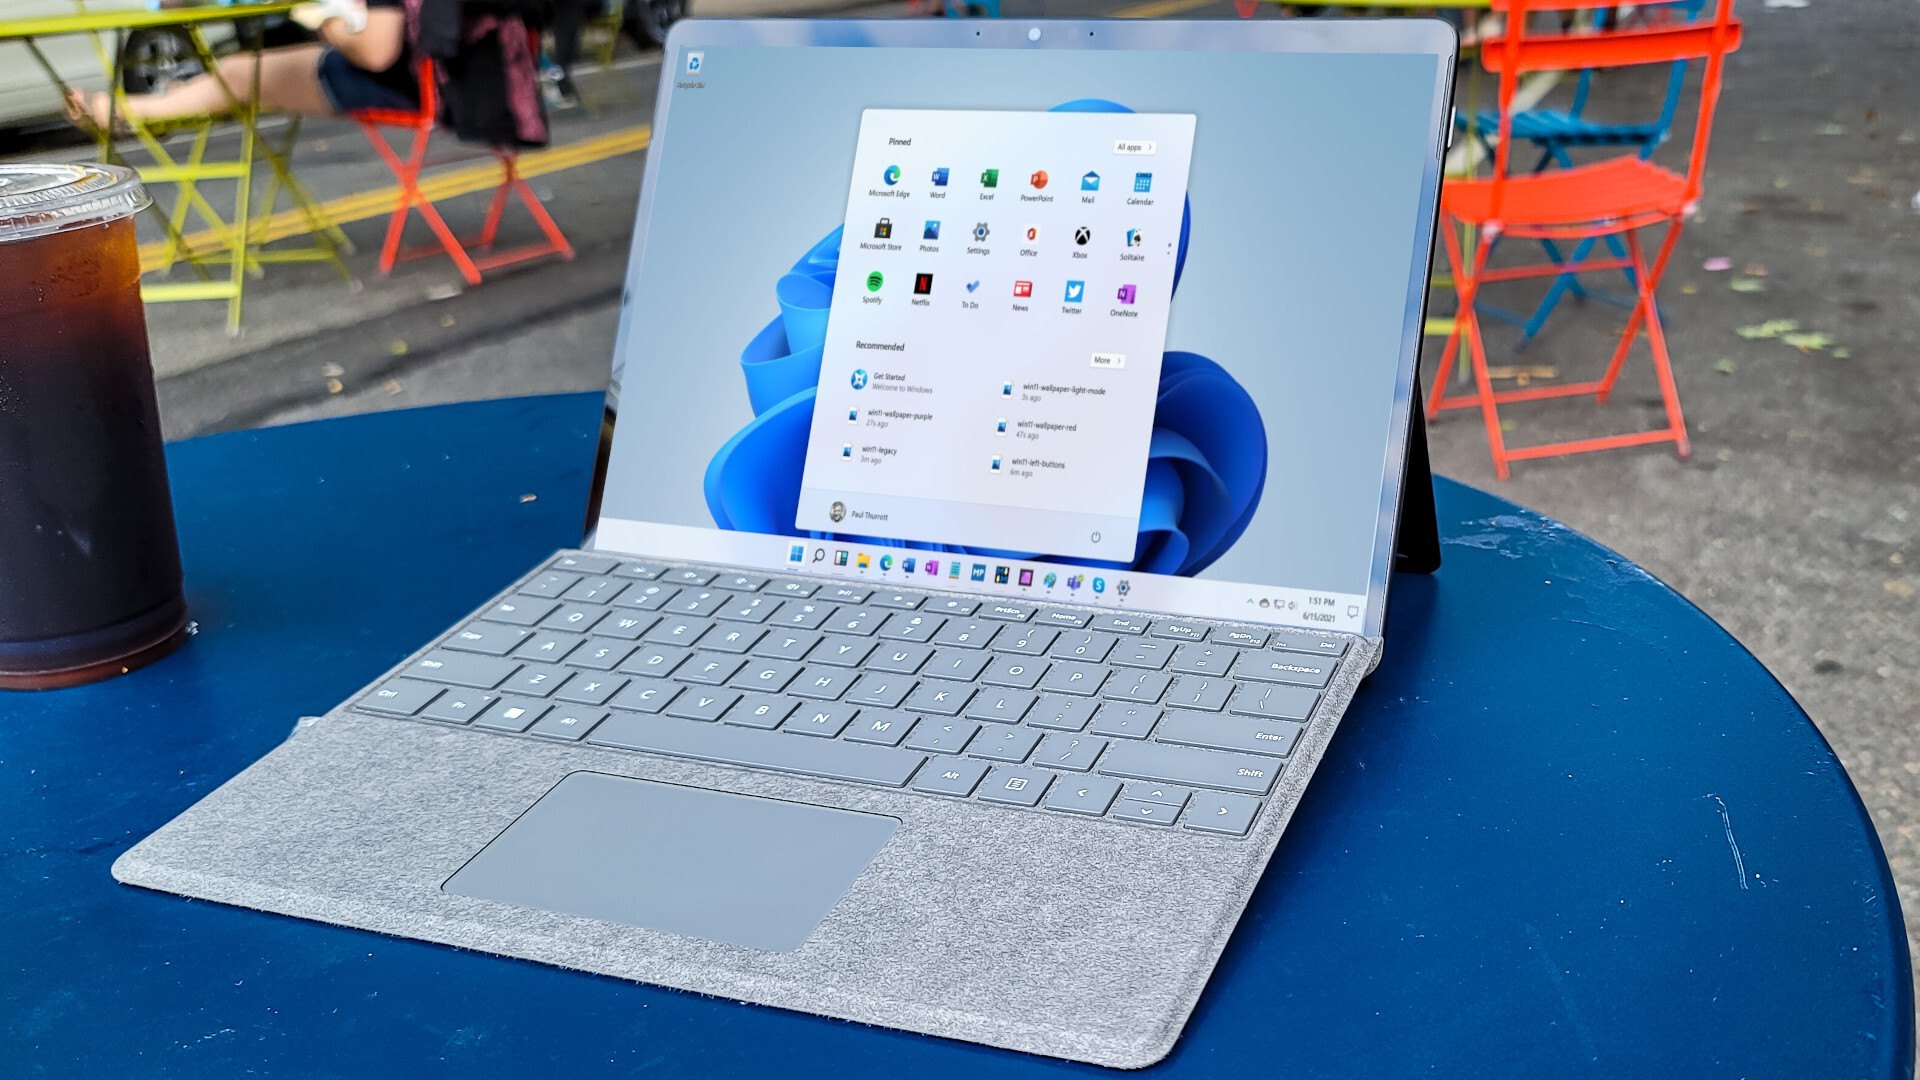 Surface Pro 8 outside on a table showing Windows 11 desktop